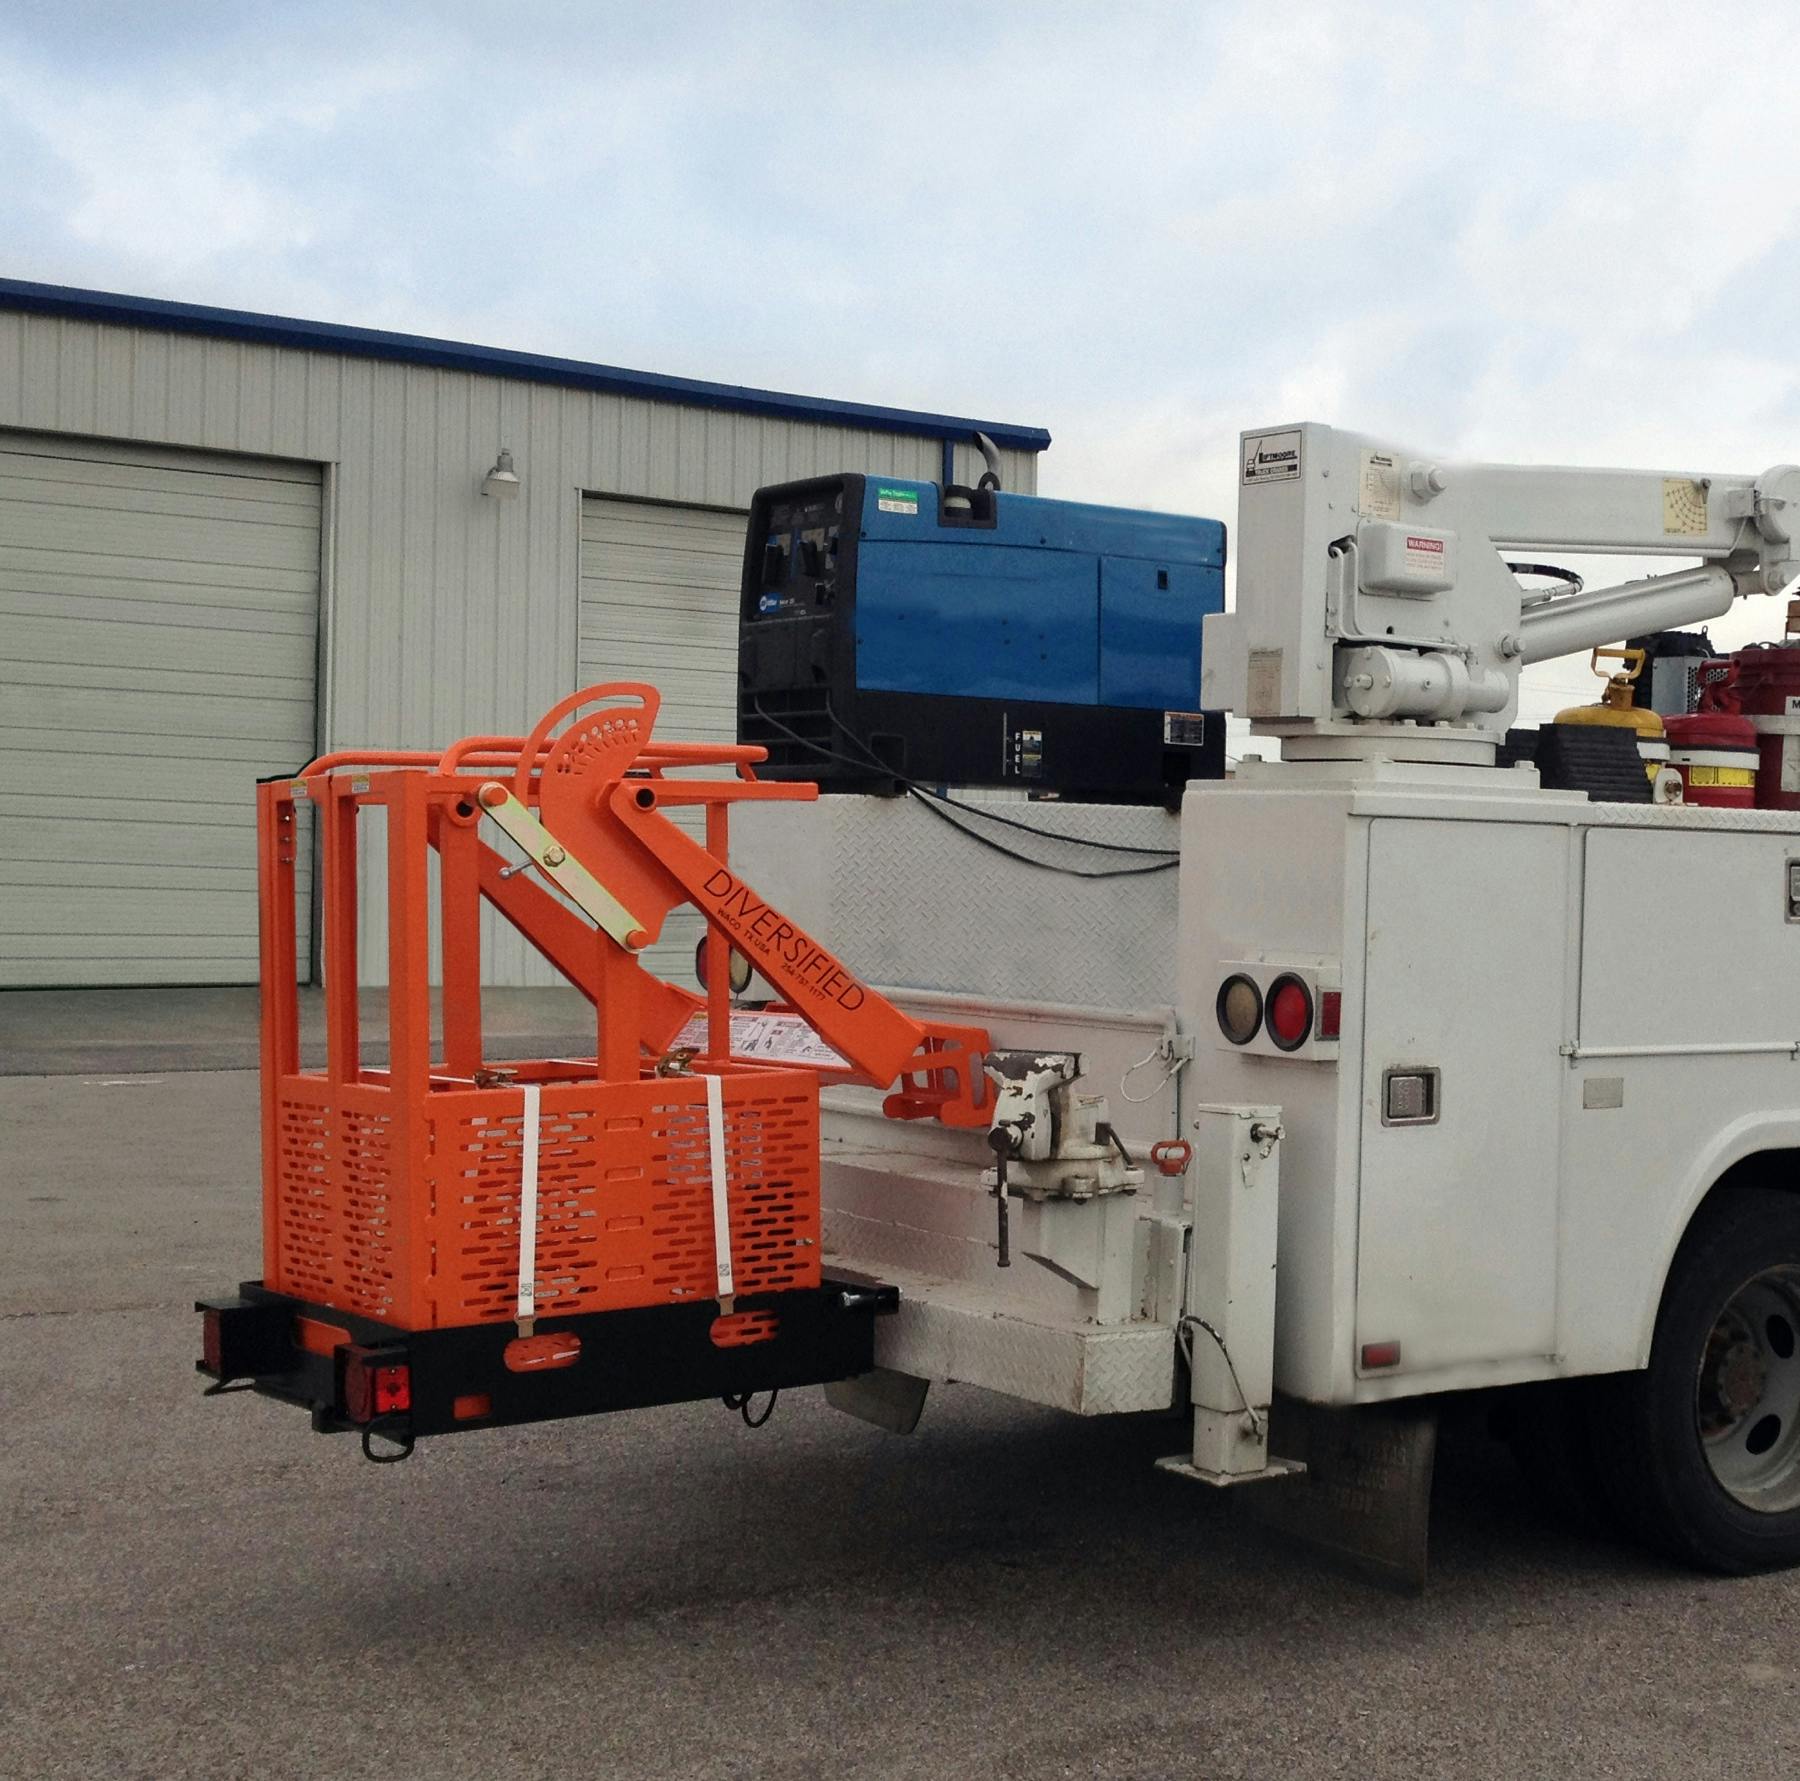 Diversified Products Introduces Fall Arrest Service Crane Basket